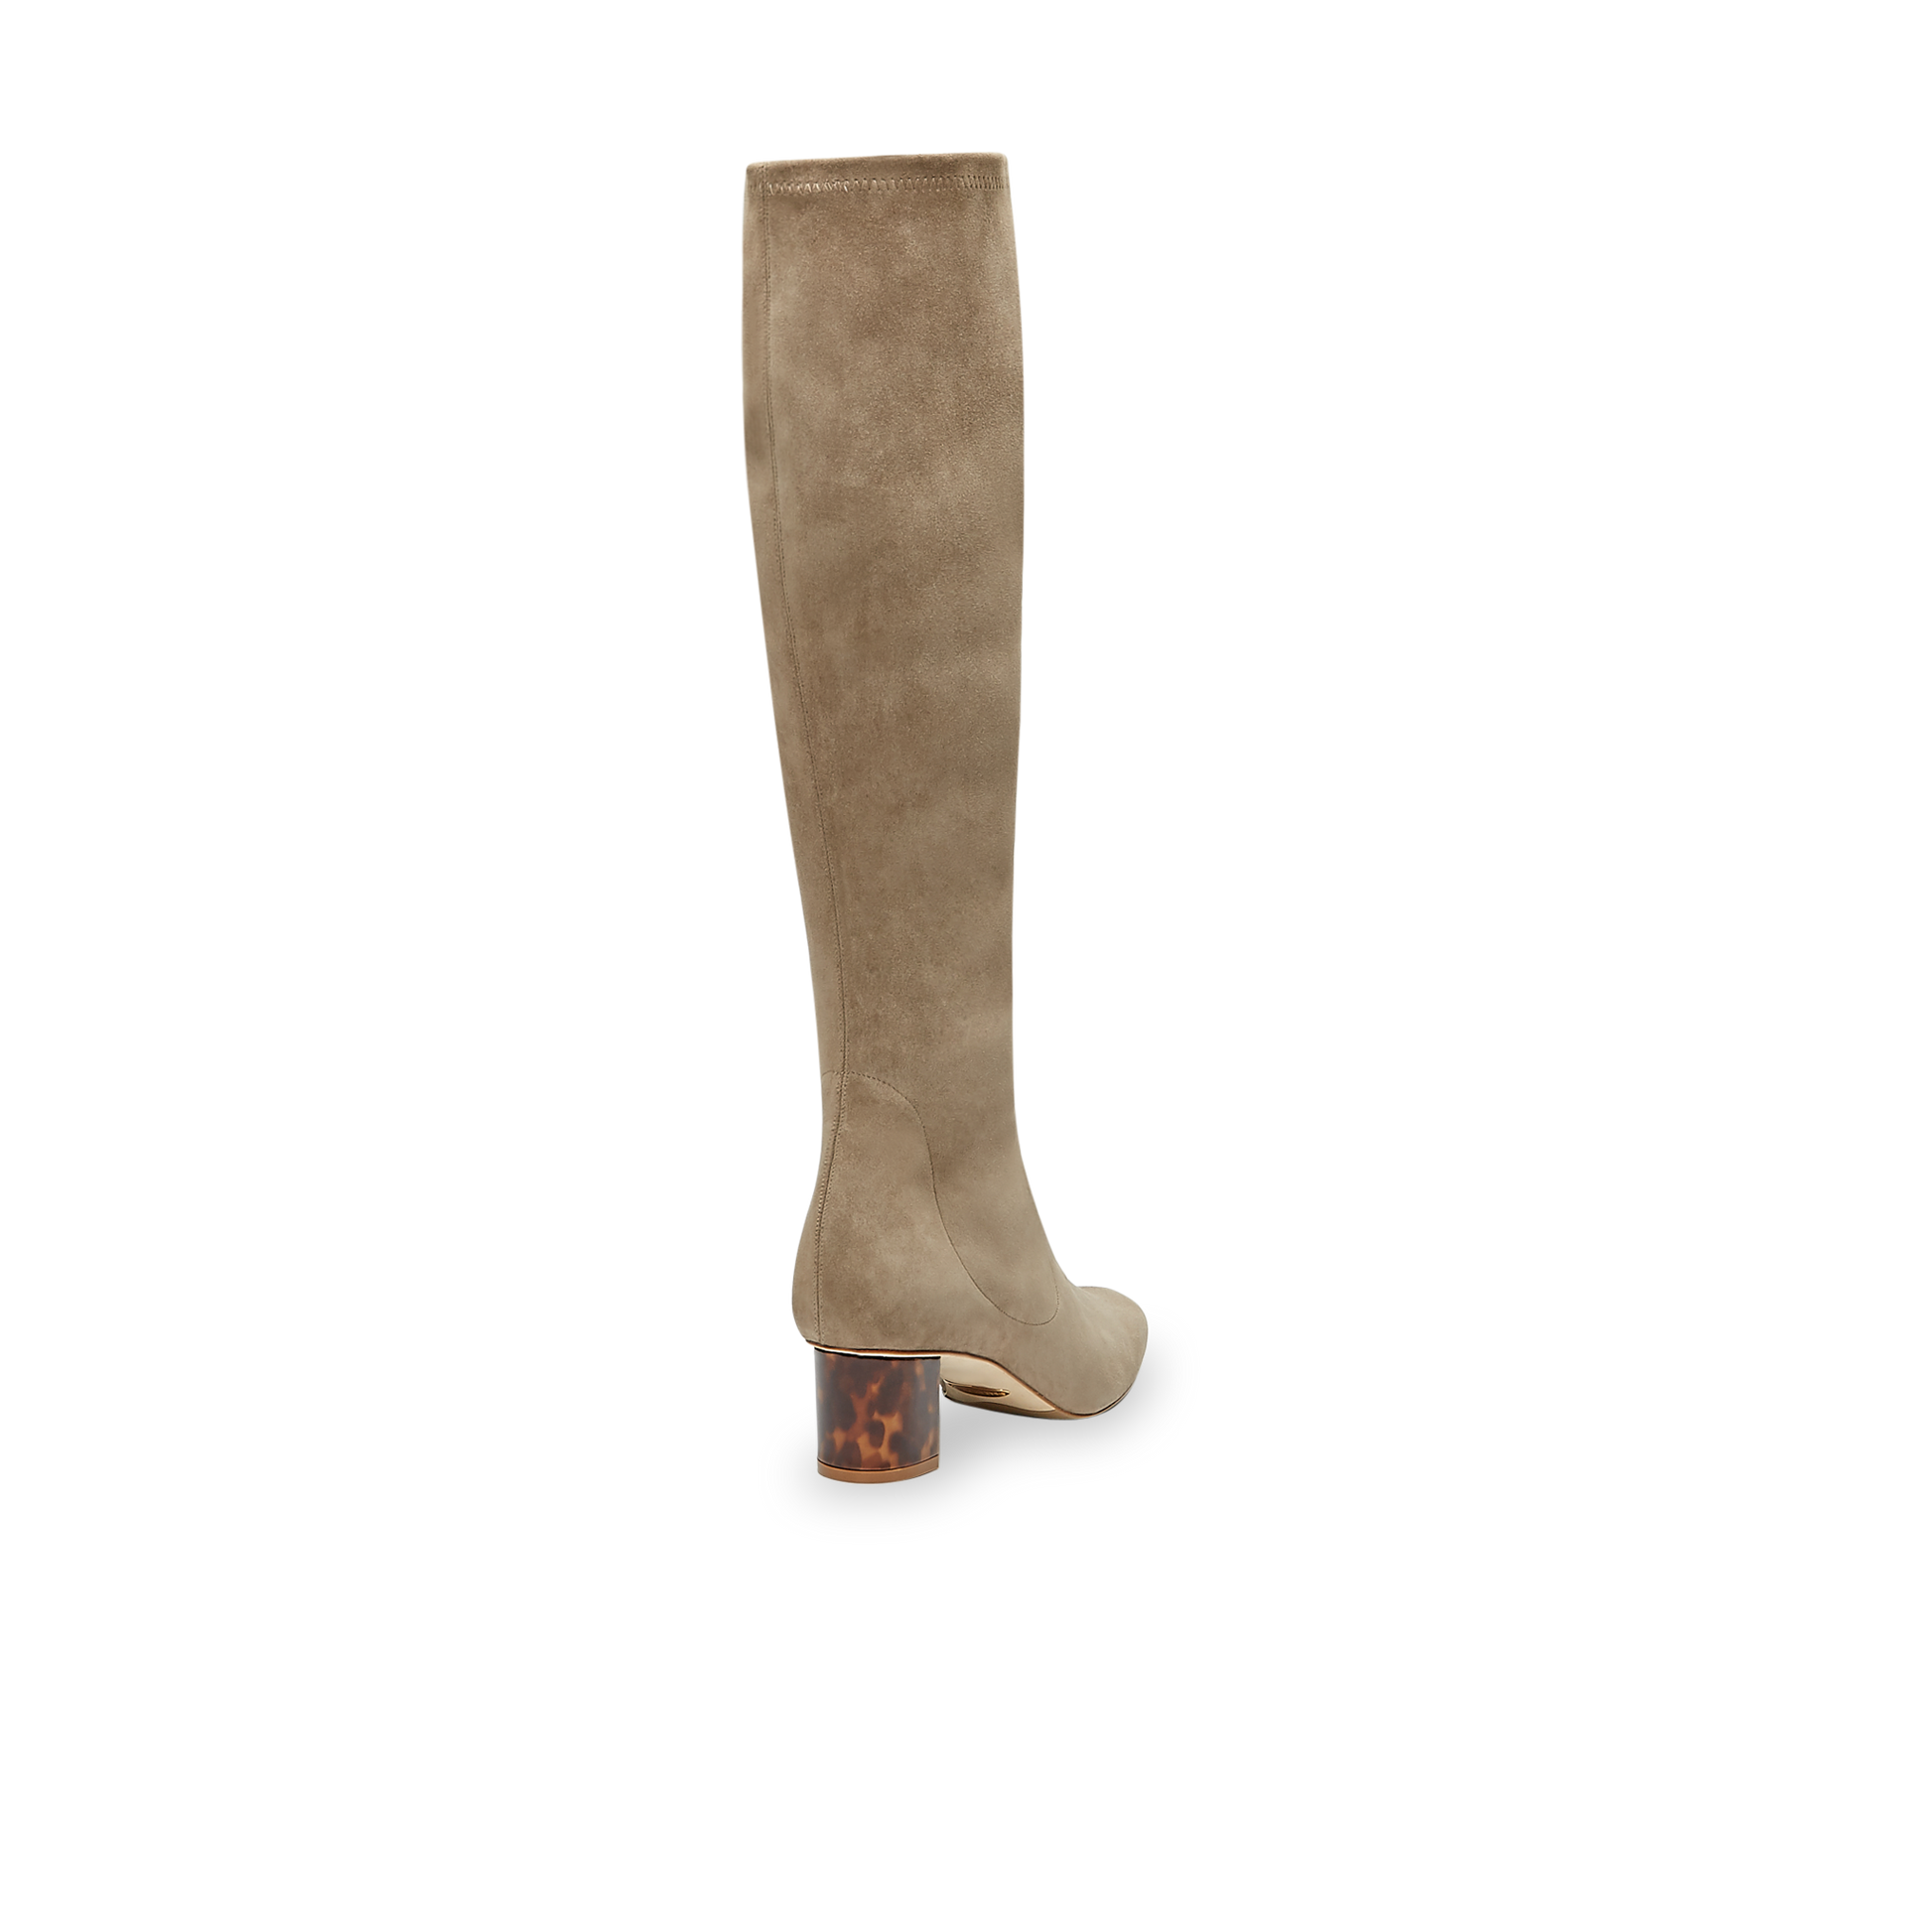 50mm Italian Made To-the-knee Alexandra Boot in Taupe Stretch Suede